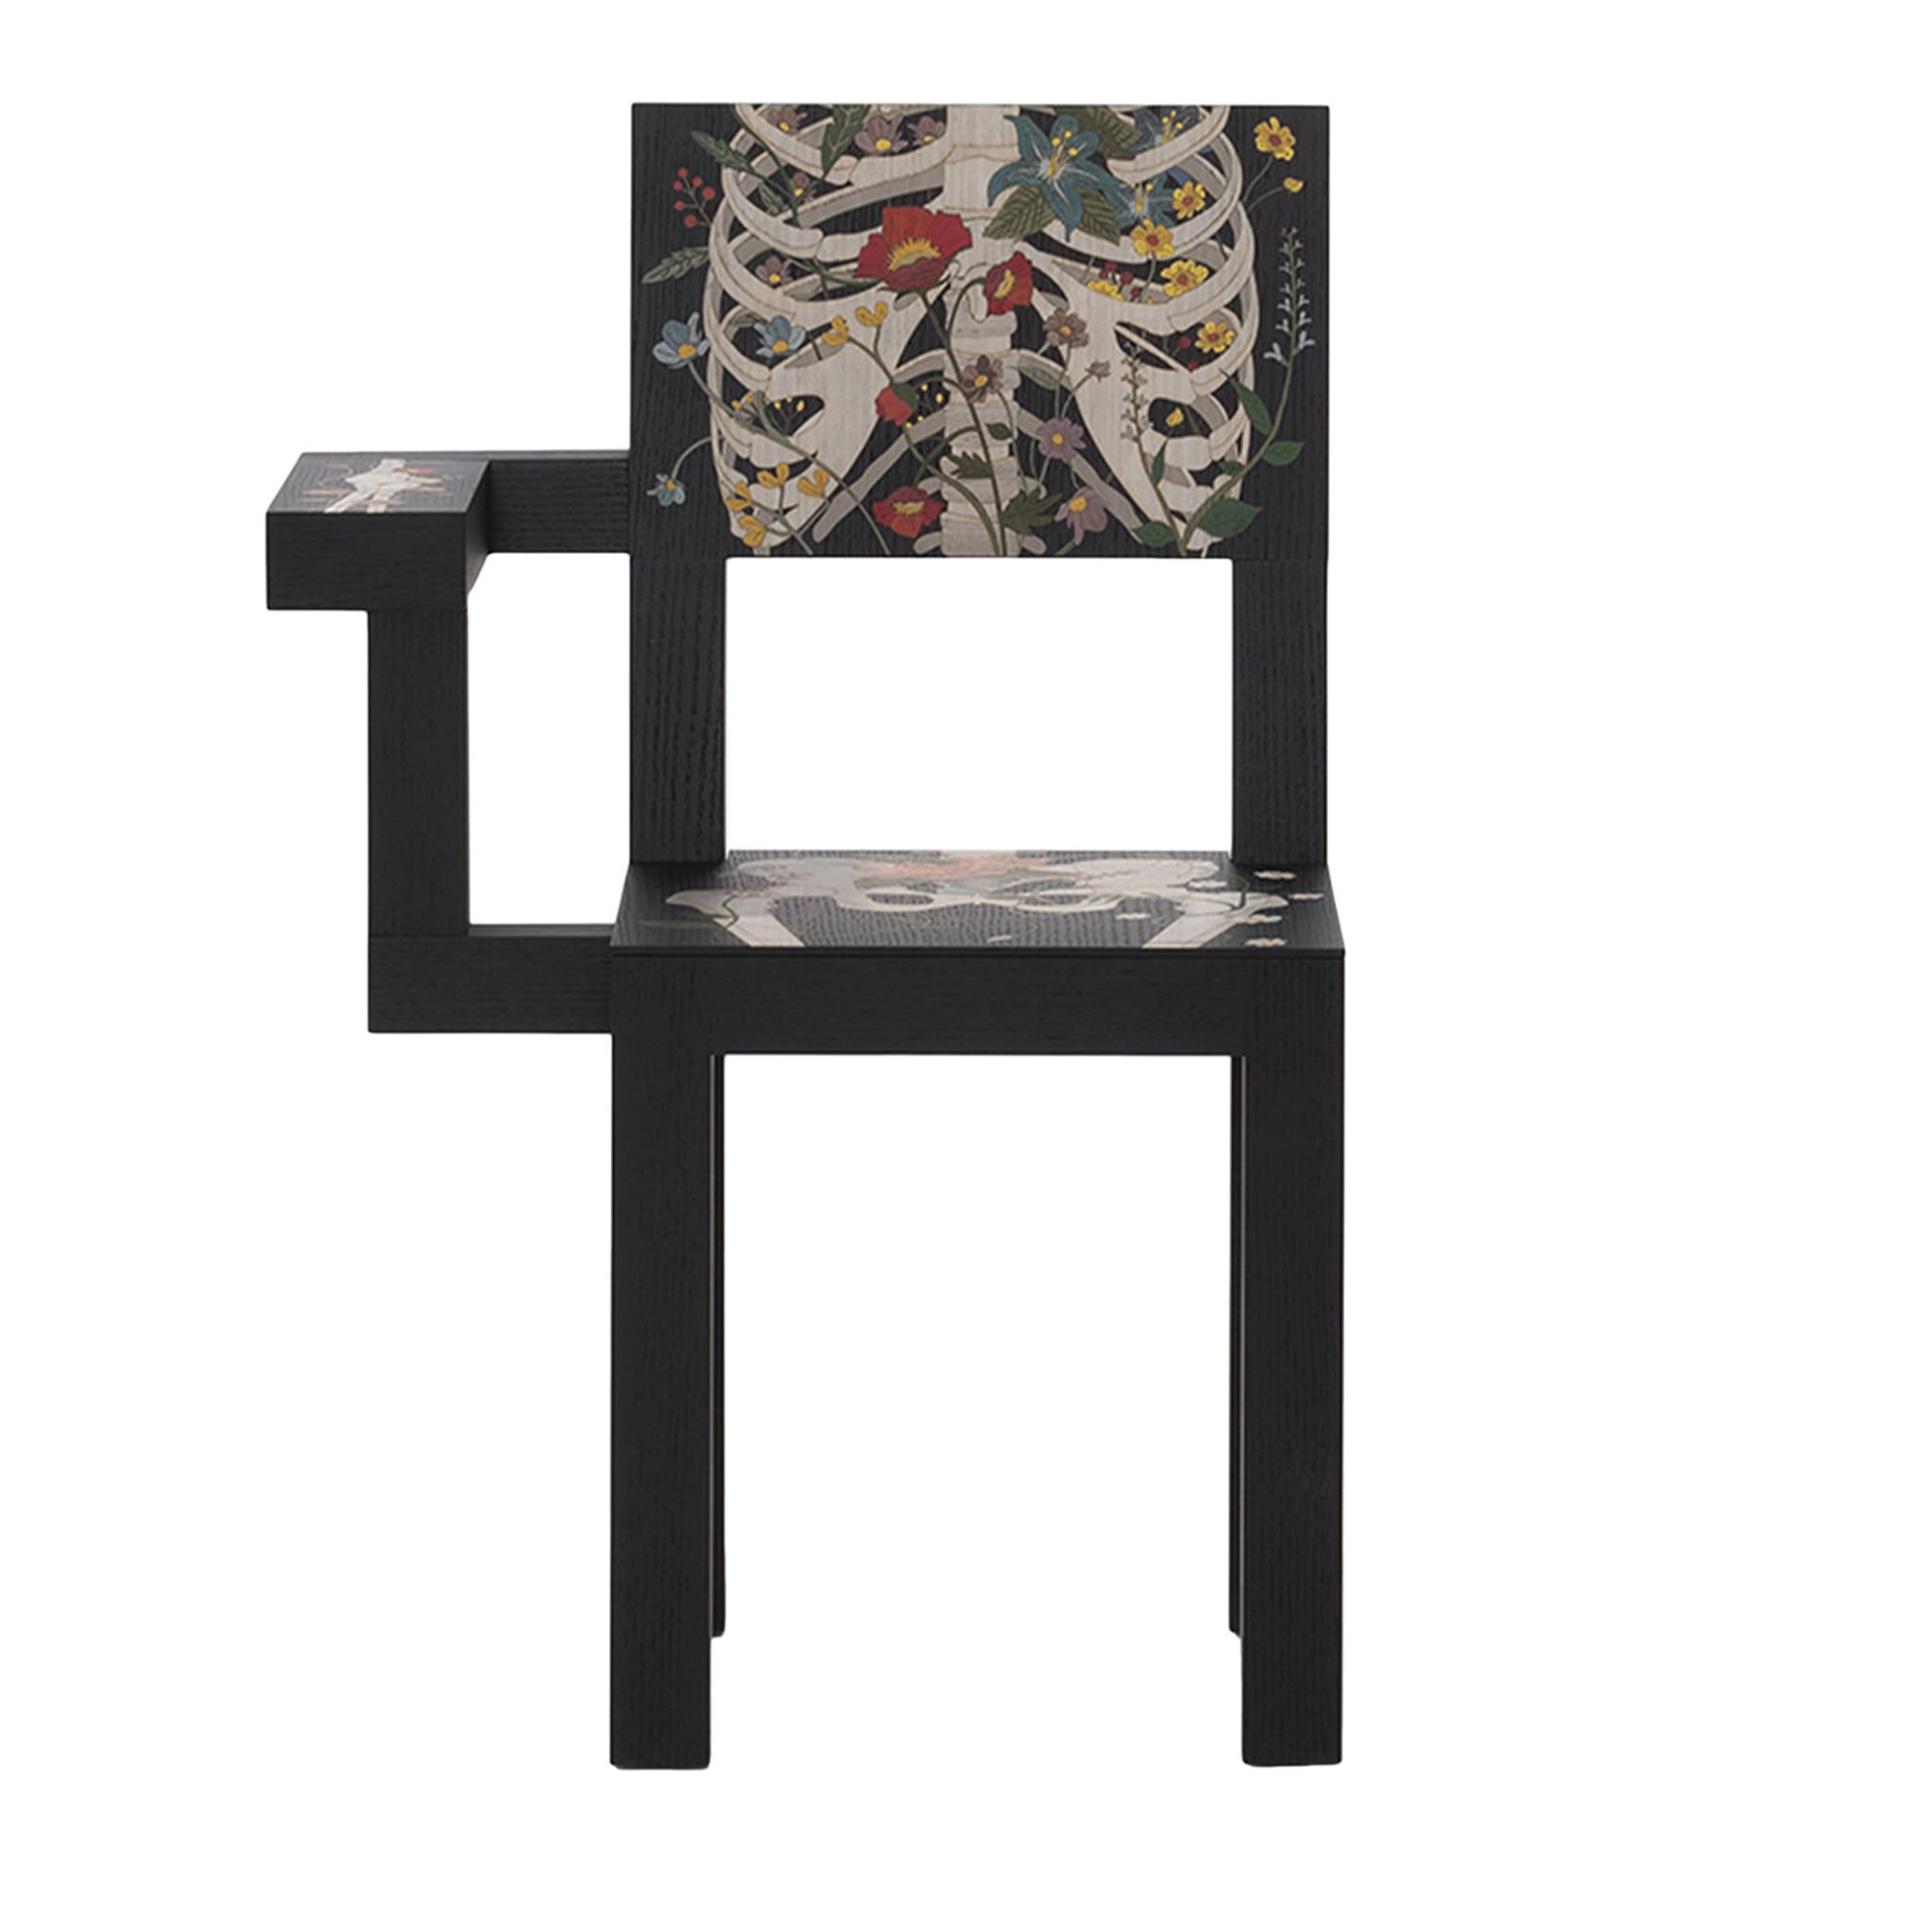 Life After Life Limited Edition Chair by Marcantonio - Main view